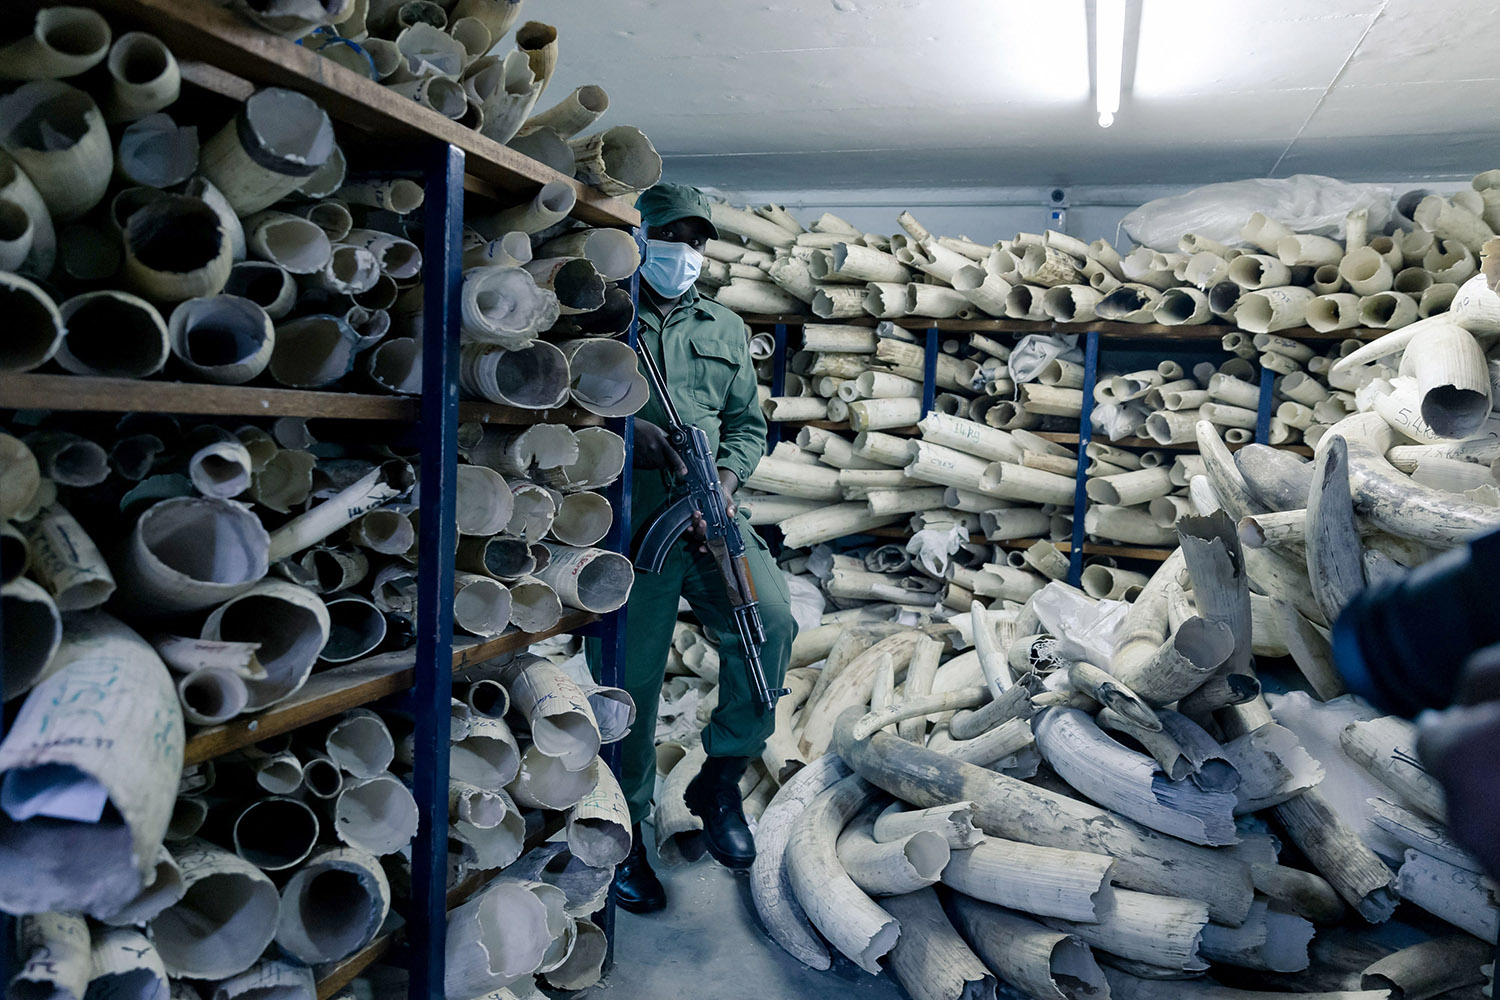 A Zimbabwe National Parks' armed guard walks through piles of elephant ivory stored inside a strong during a tour of the stockpile by European Union envoys, in Harare, Zimbabwe on May 16.